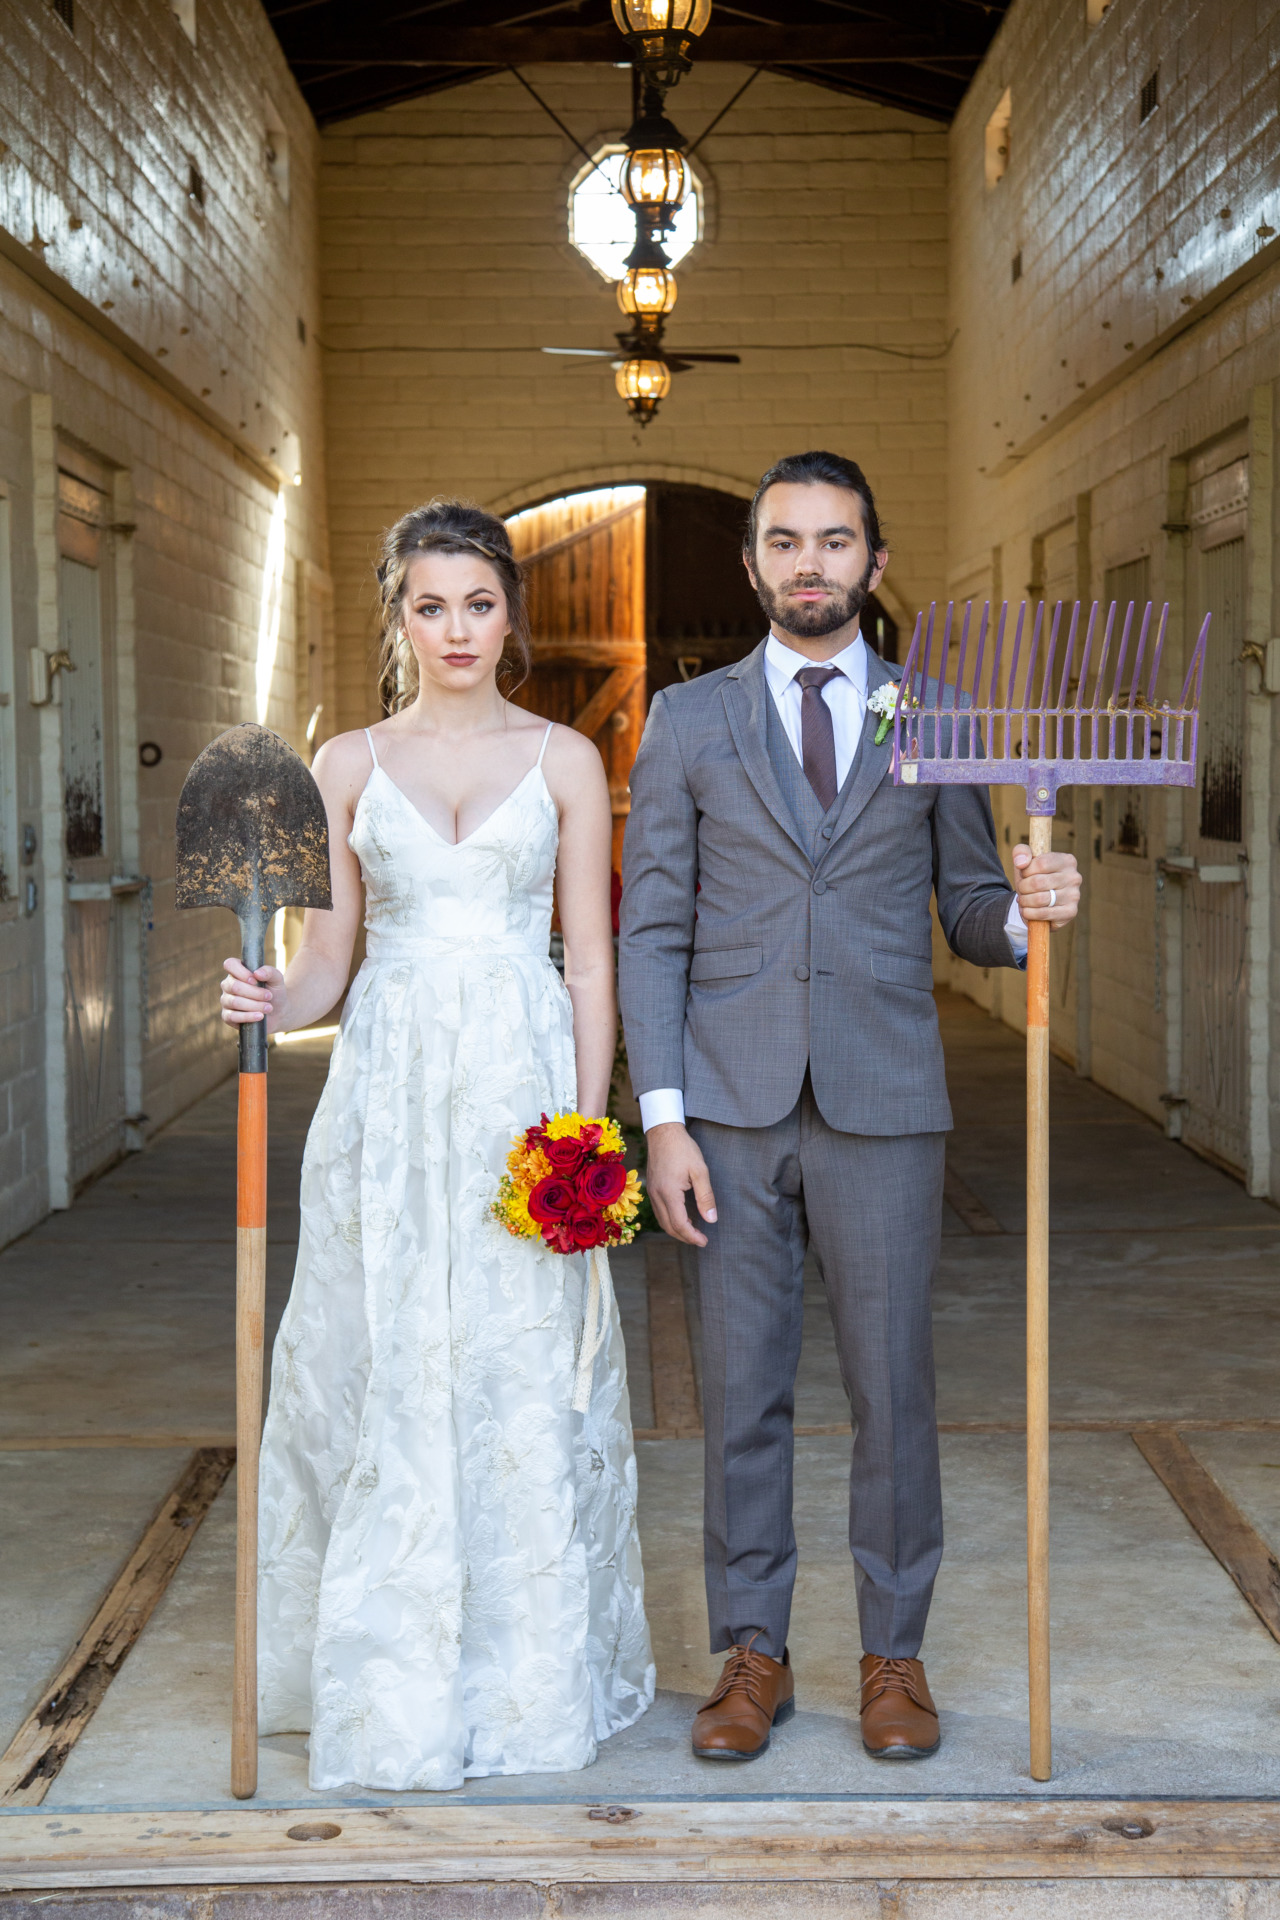 The American Gothic at The Farm by KSE